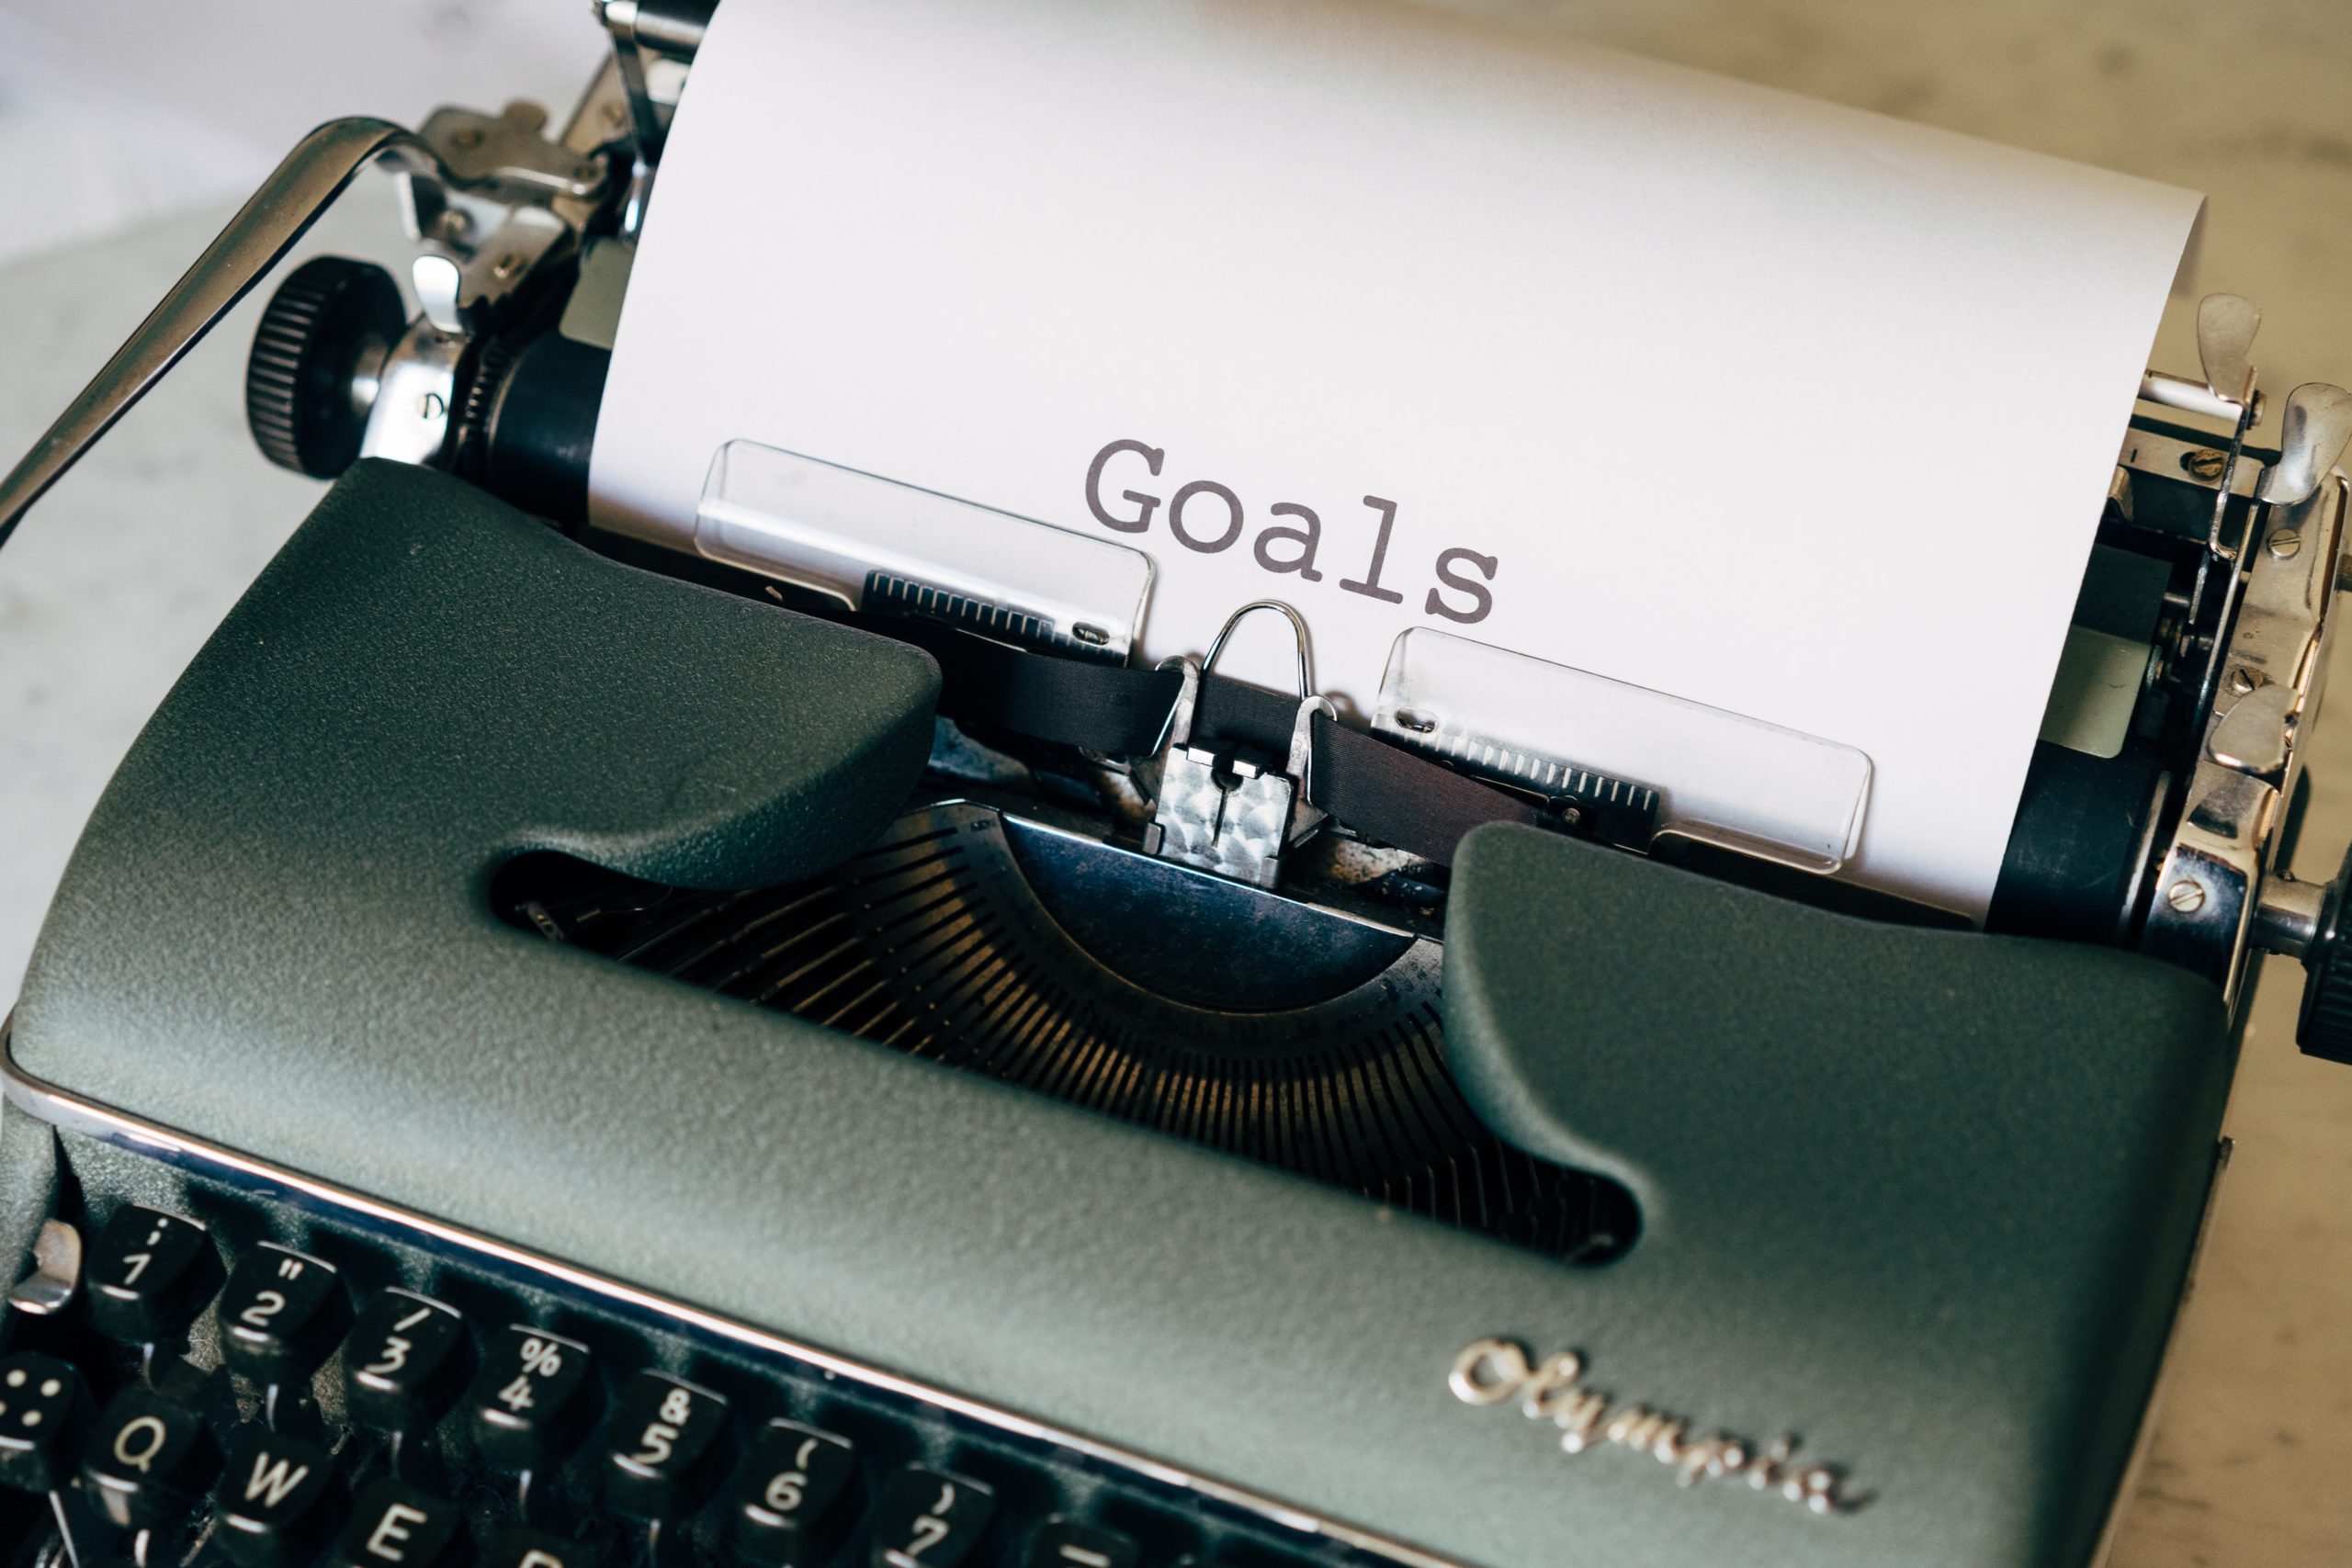 How to Set Goals and Achieve Them